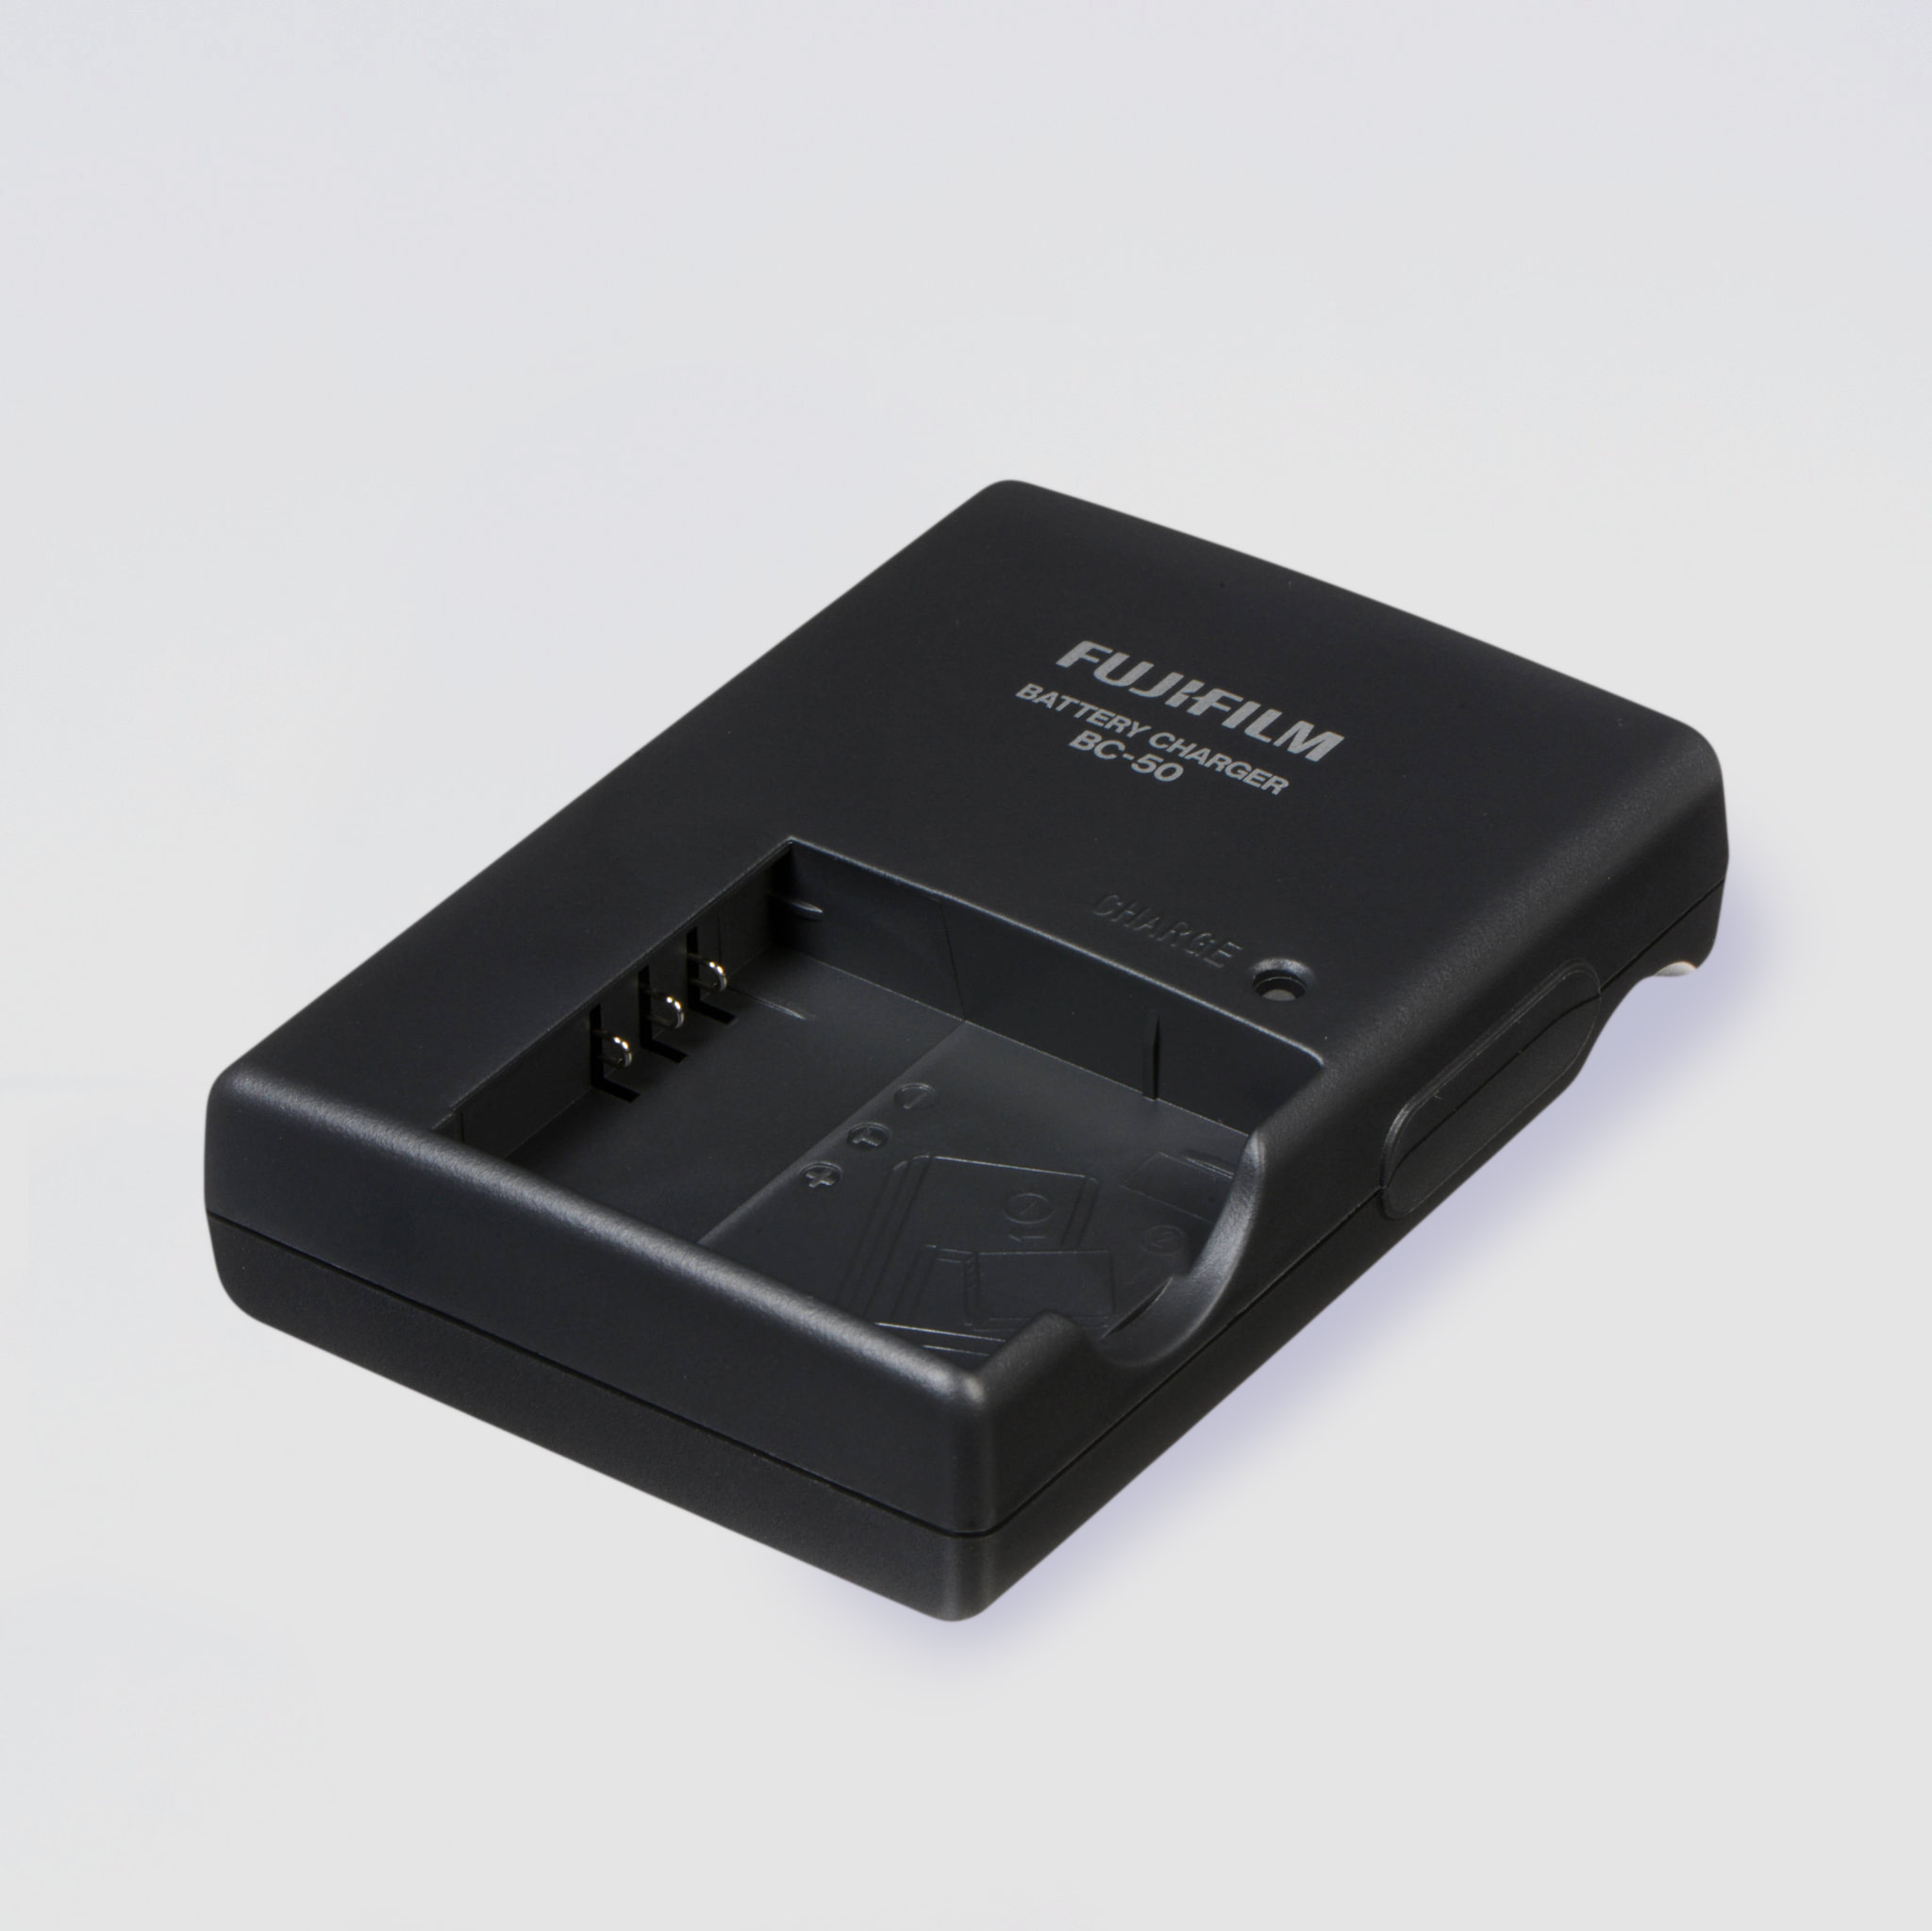 Fujifilm BC-50 battery charger